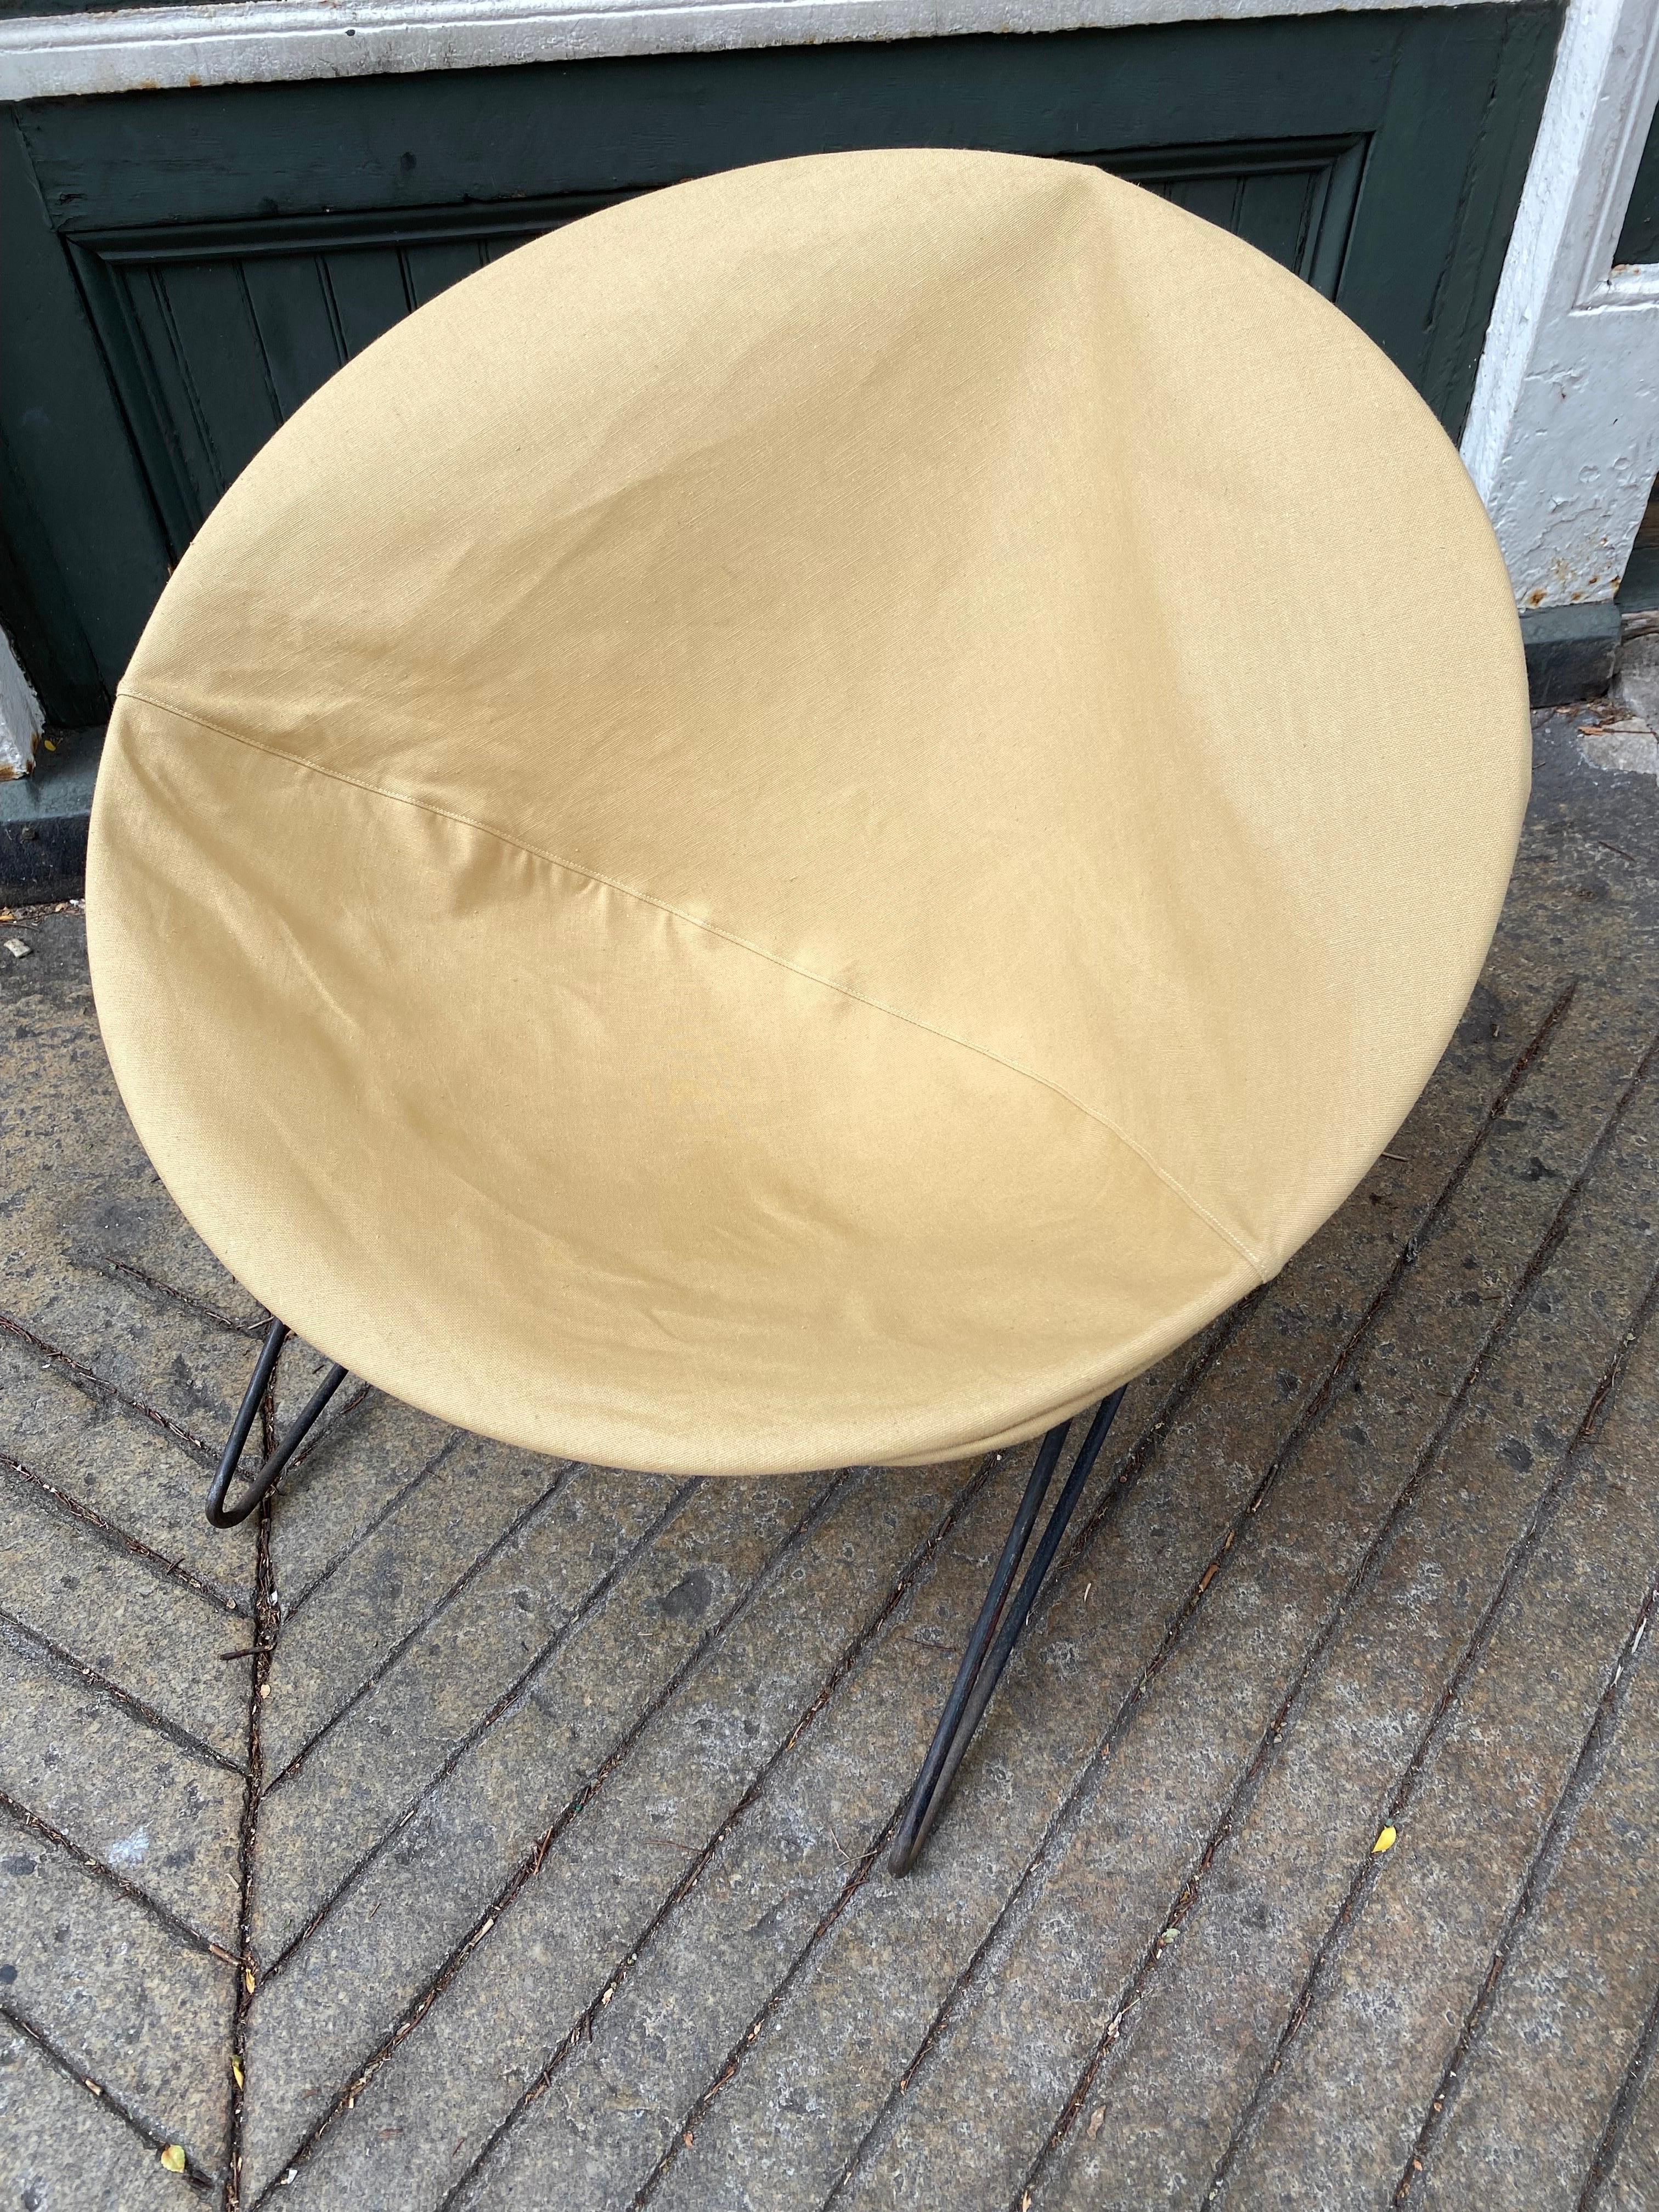 Iron and Canvas Circle Sling Chair. Newly reupholstered cover. Surprisingly sturdy and comfortable! Light weight makes it easy to move around where ever it might be needed! Throw a lambs wool skin on for a more upscale feel!